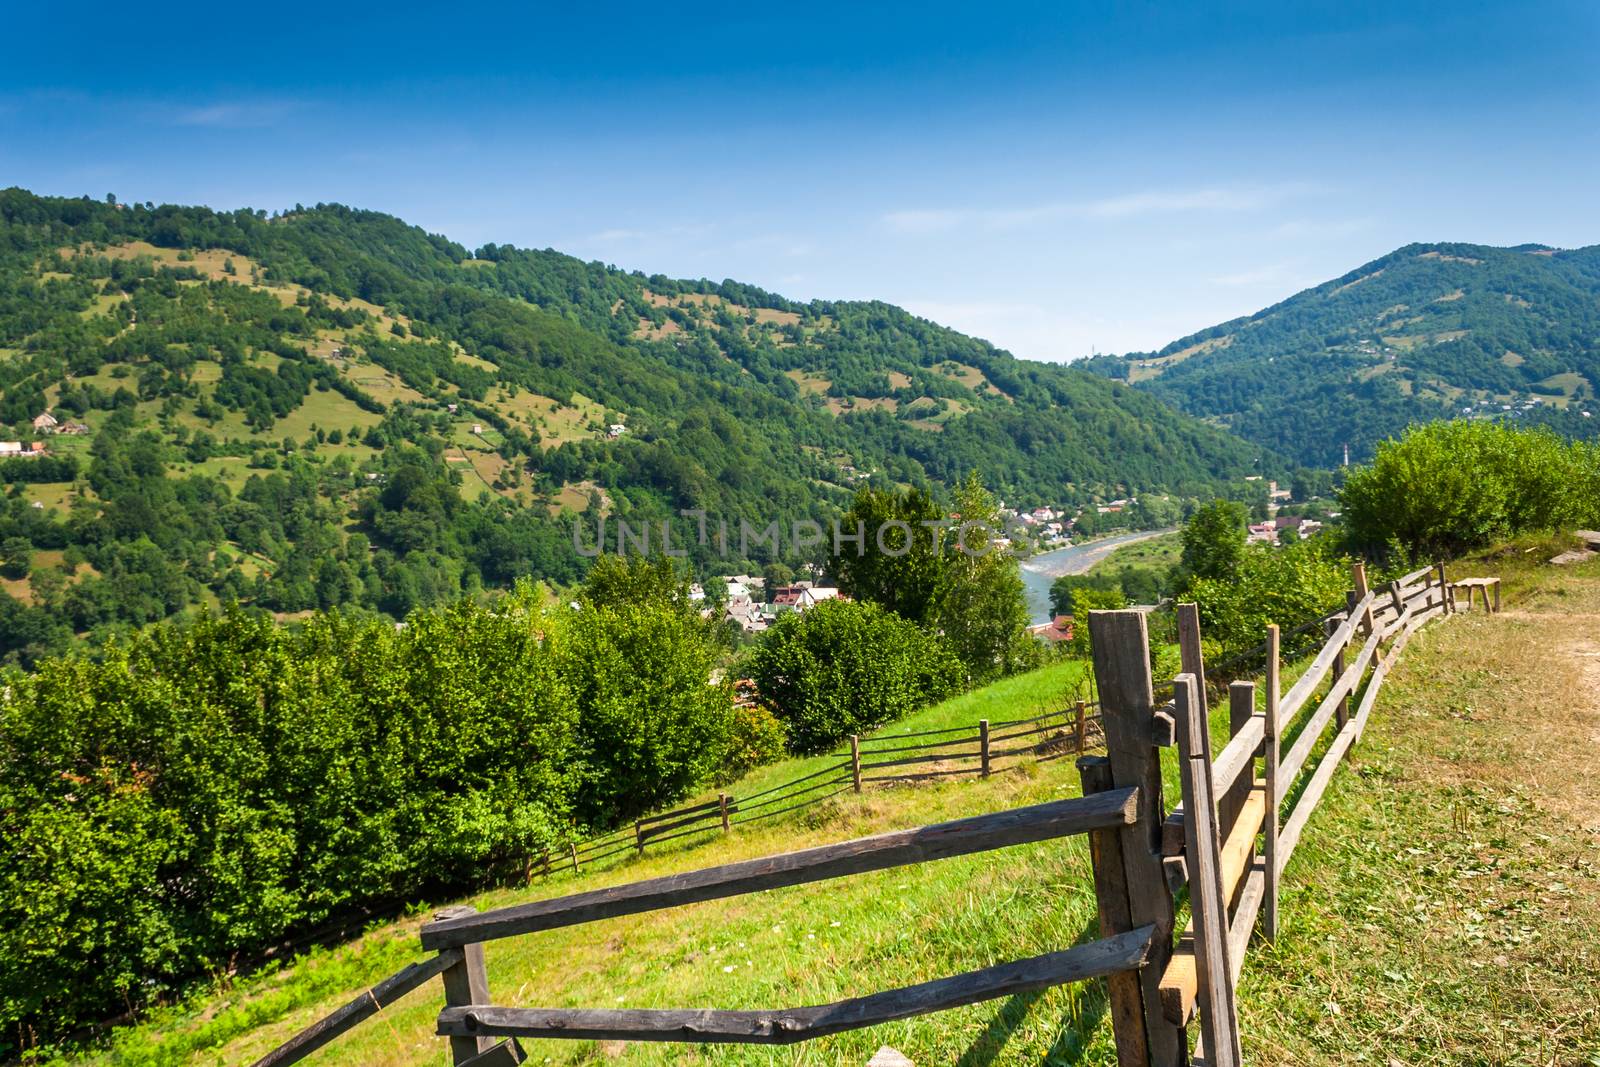 wooden stick fence in vilage in mountains with blue sky, green grass and path in good weather time